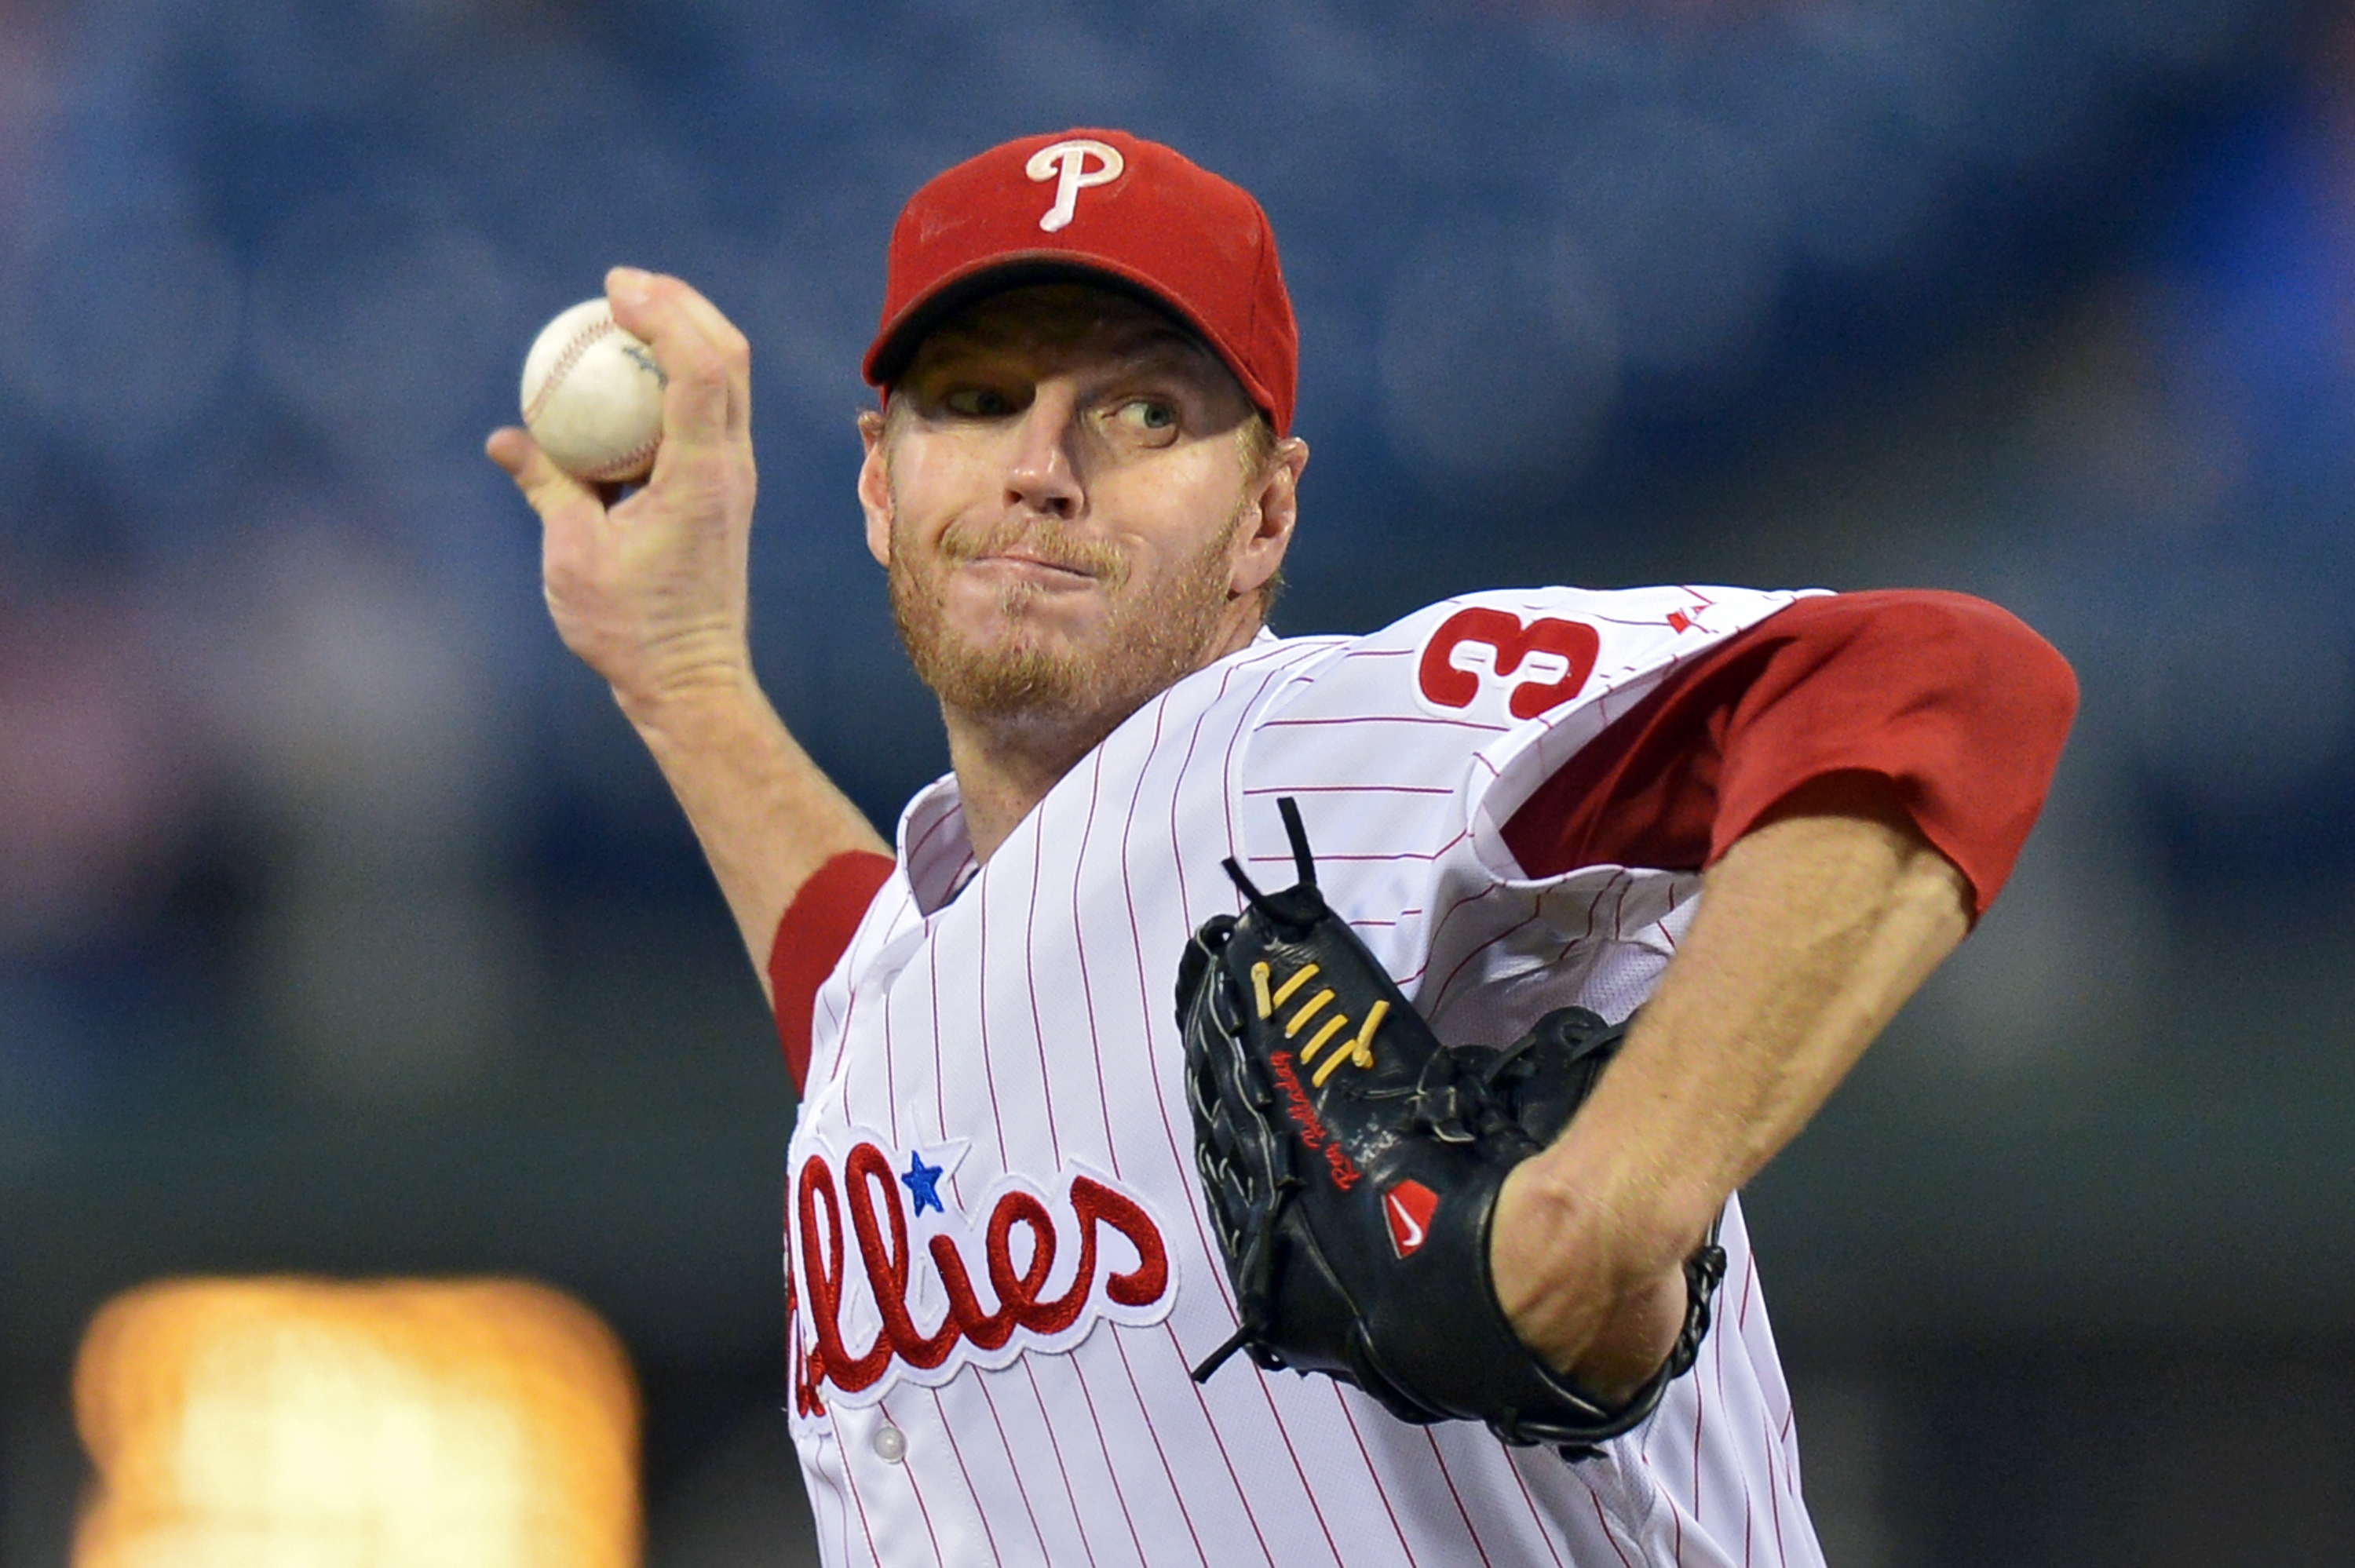 What made Roy Halladay stronger might have also contributed to his